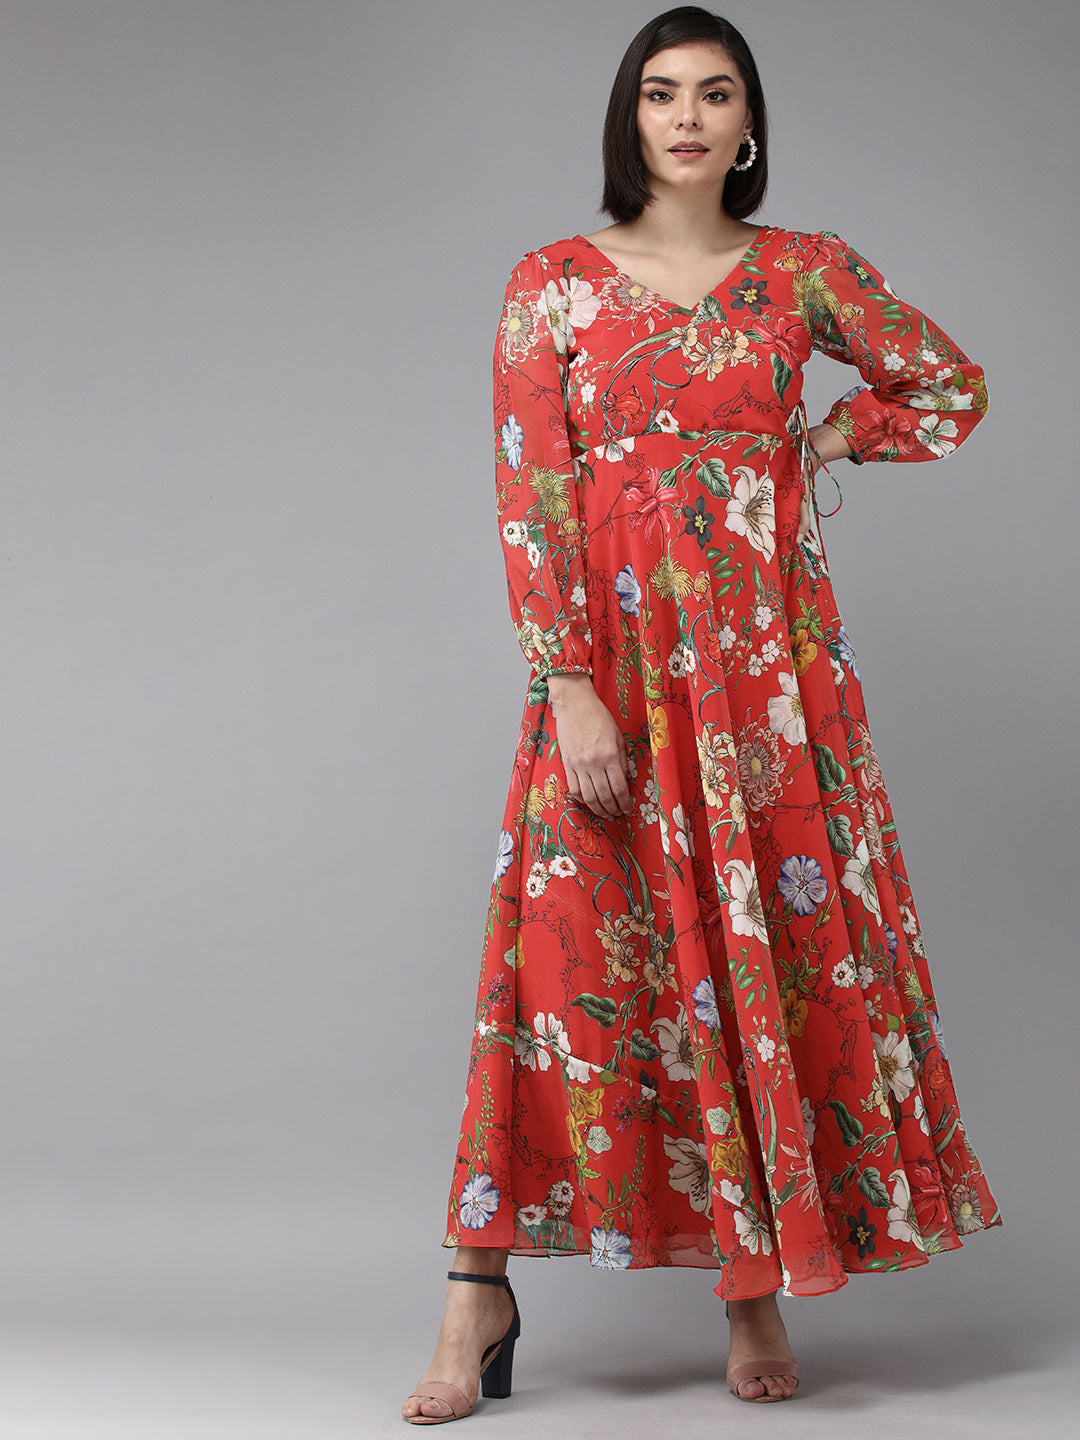 Bhama Couture Red Floral Geogette Maxi Dress